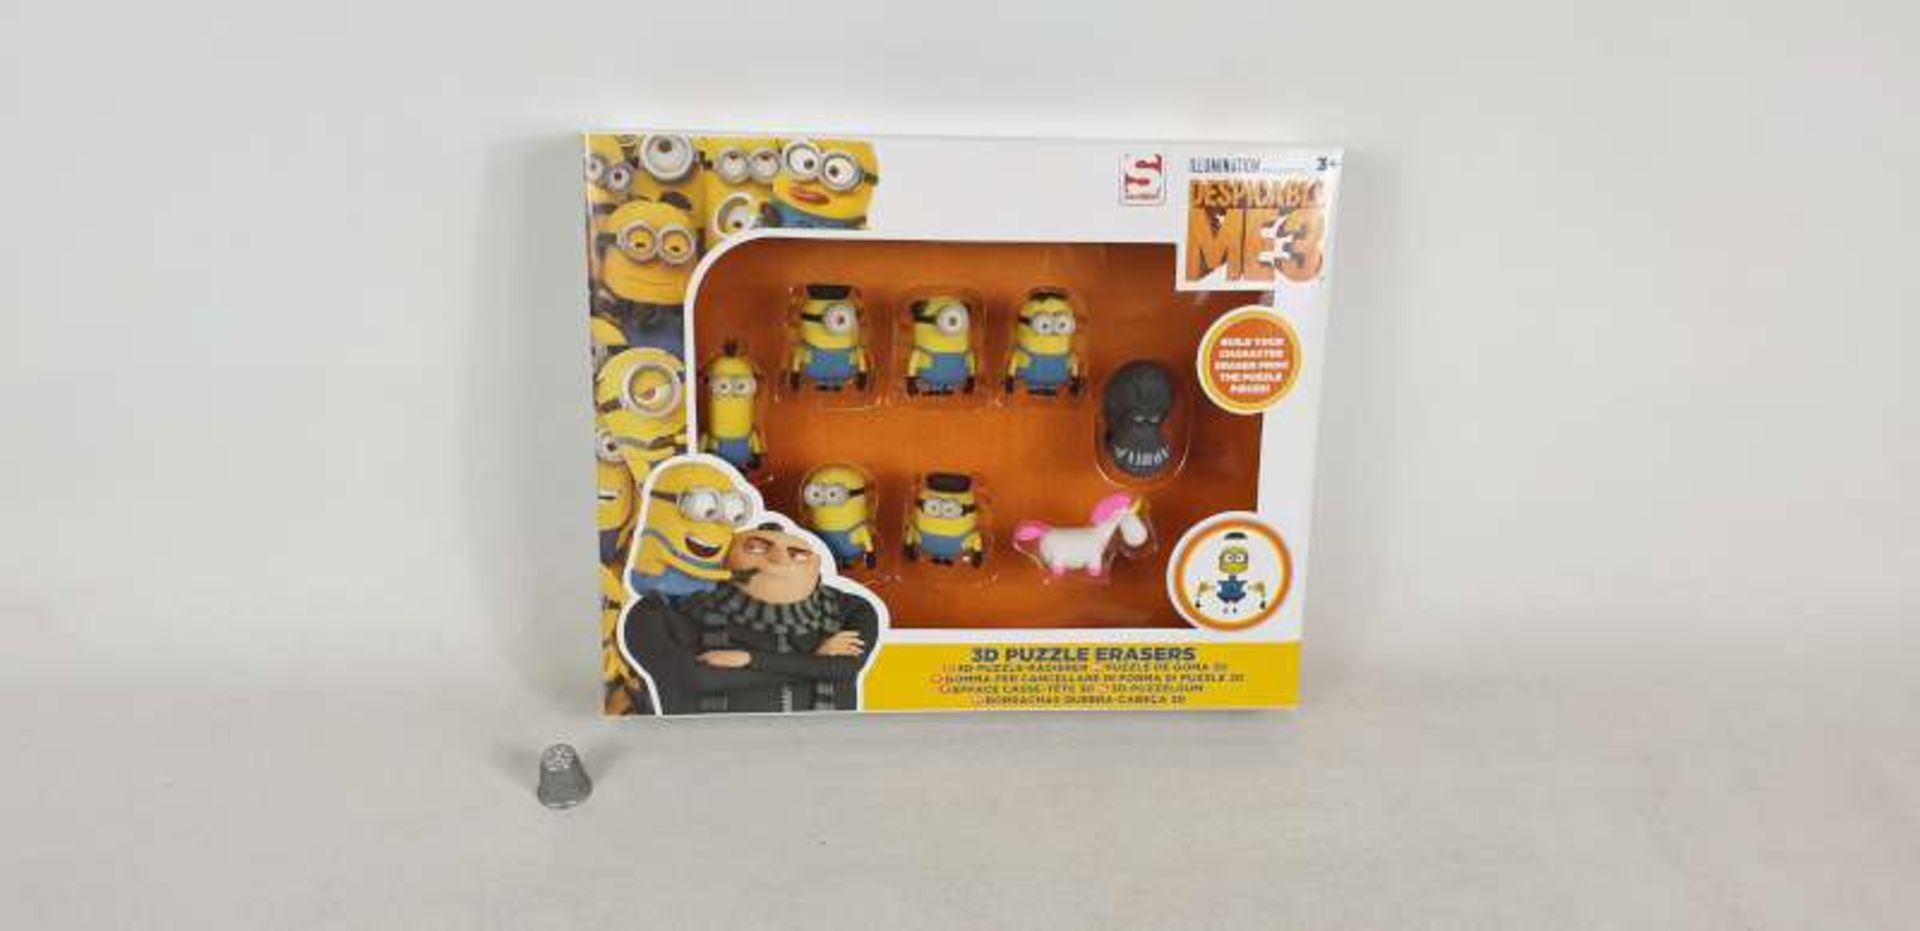 36 X DESPICABLE ME 8 PACK 3D PUZZLE ERASERS IN 3 BOXES